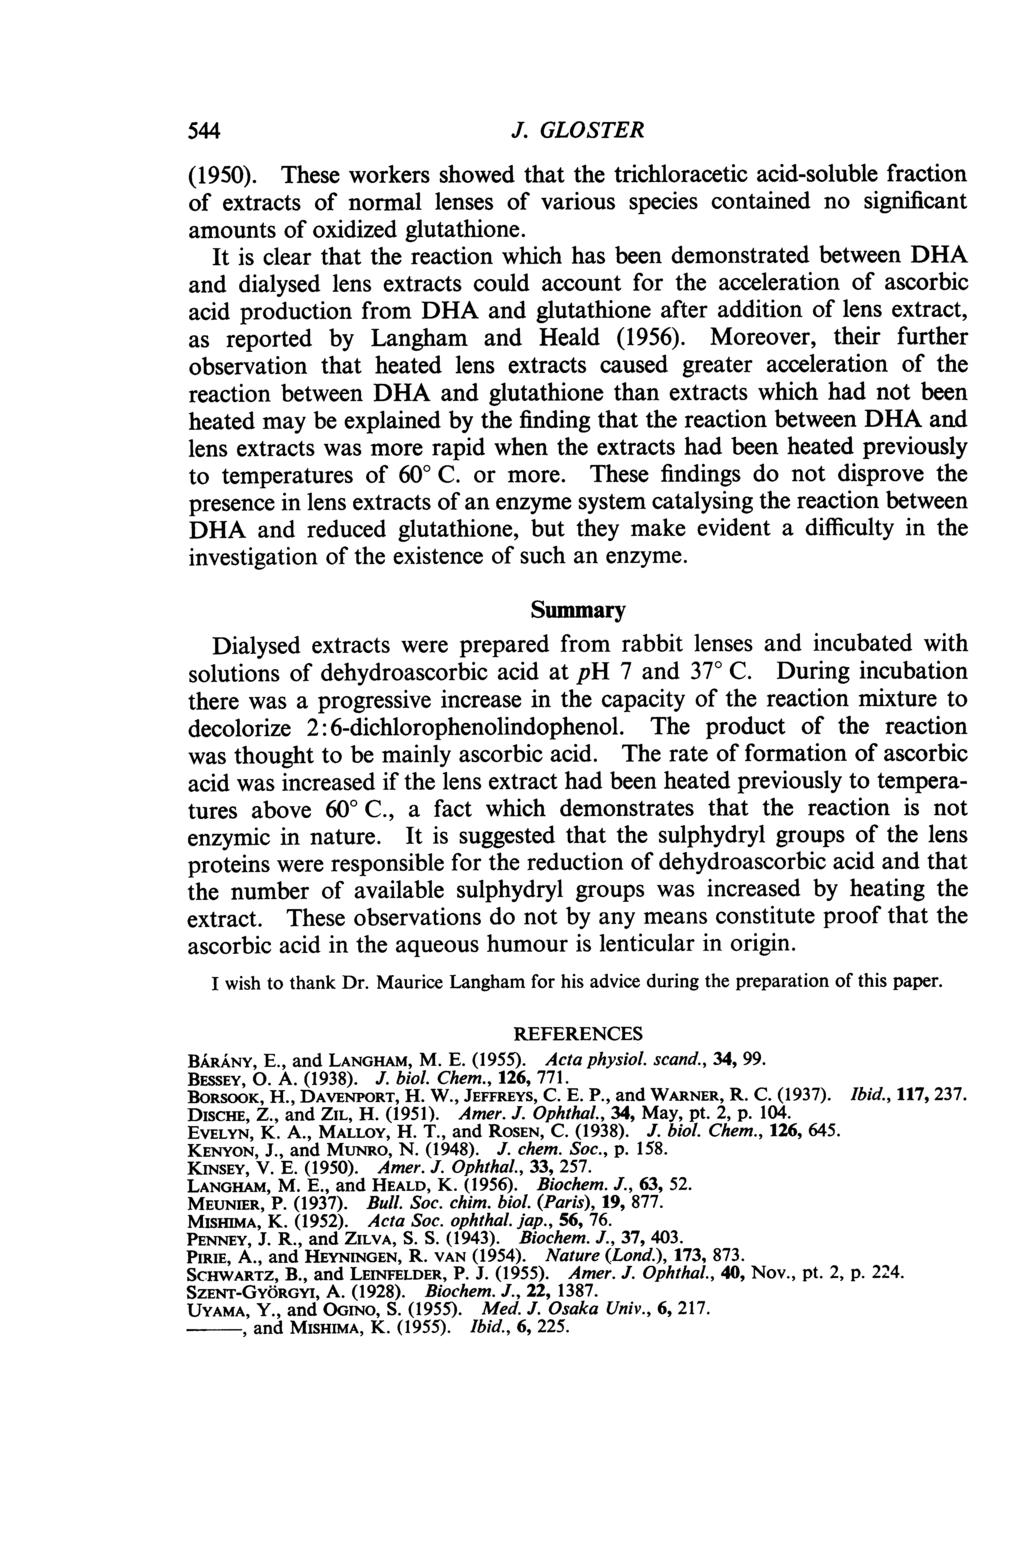 544 J. GLOSTER (195). These workers showed that the trichloracetic acid-soluble fraction of extracts of normal lenses of various species contained no significant amounts of oxidized glutathione.